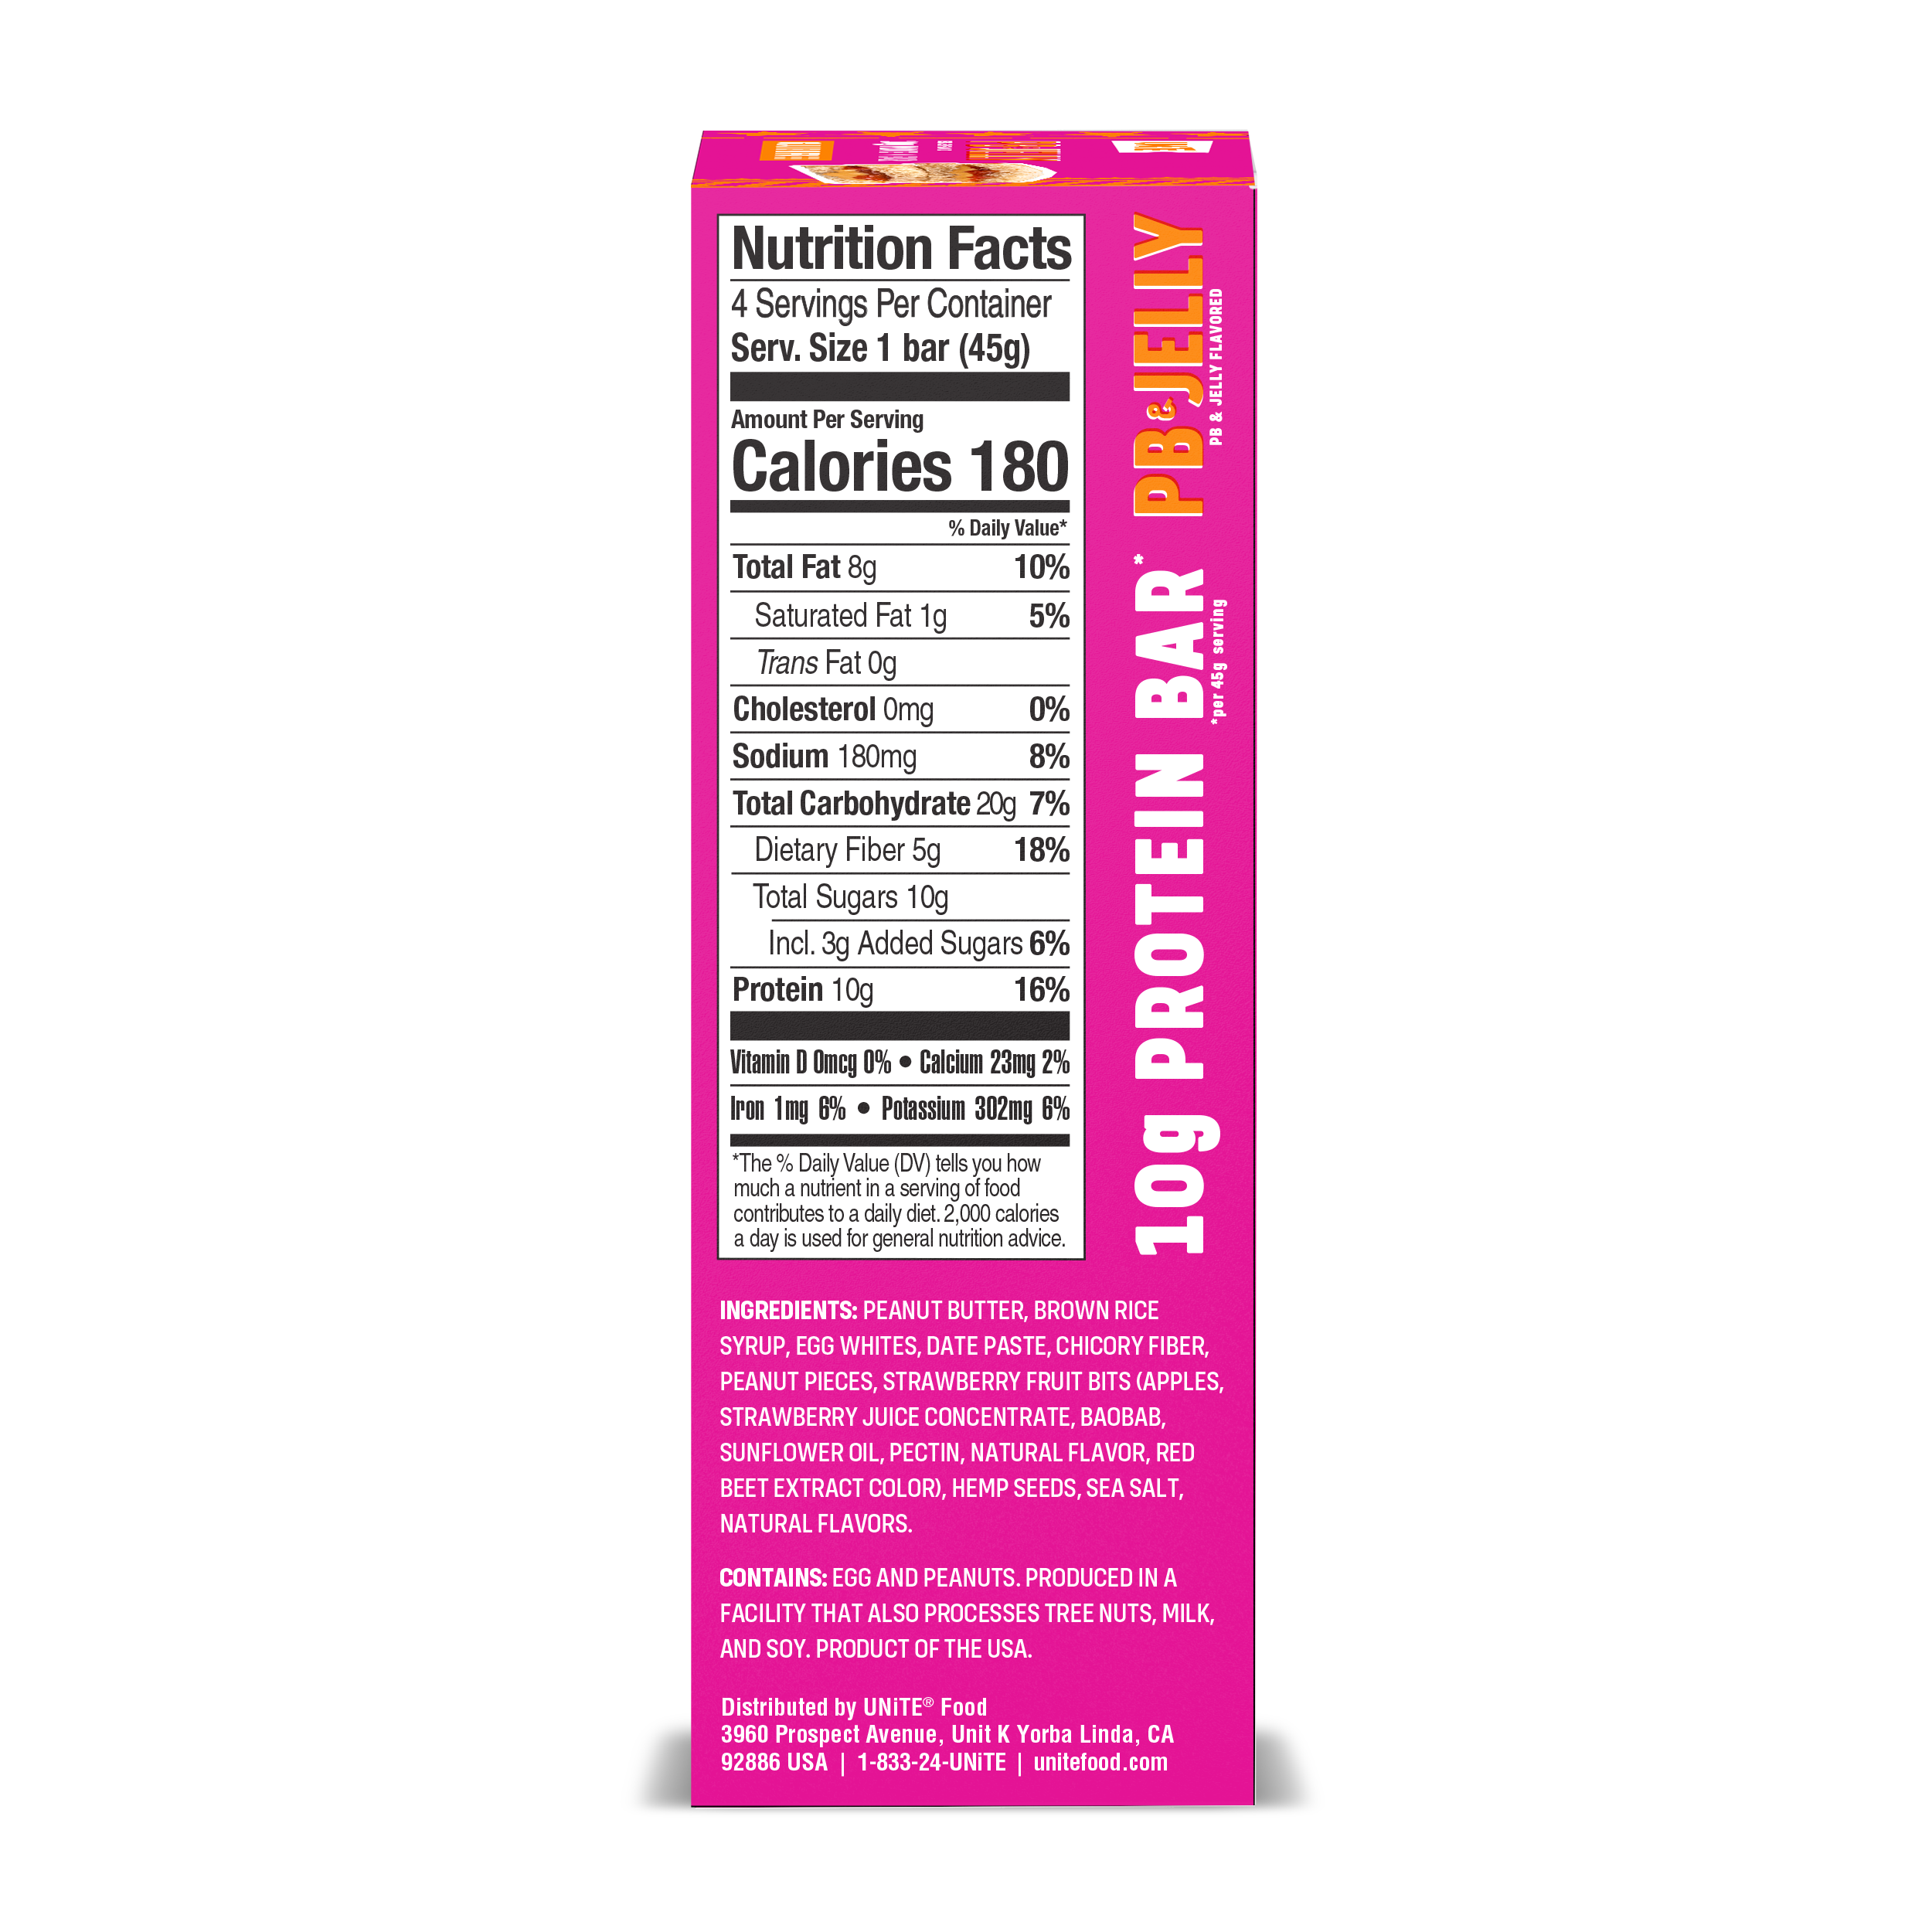 Unite Food High-Protein Bar, Peanut Butter and Jelly, 4 Ct, 1.58 oz. - image 3 of 7